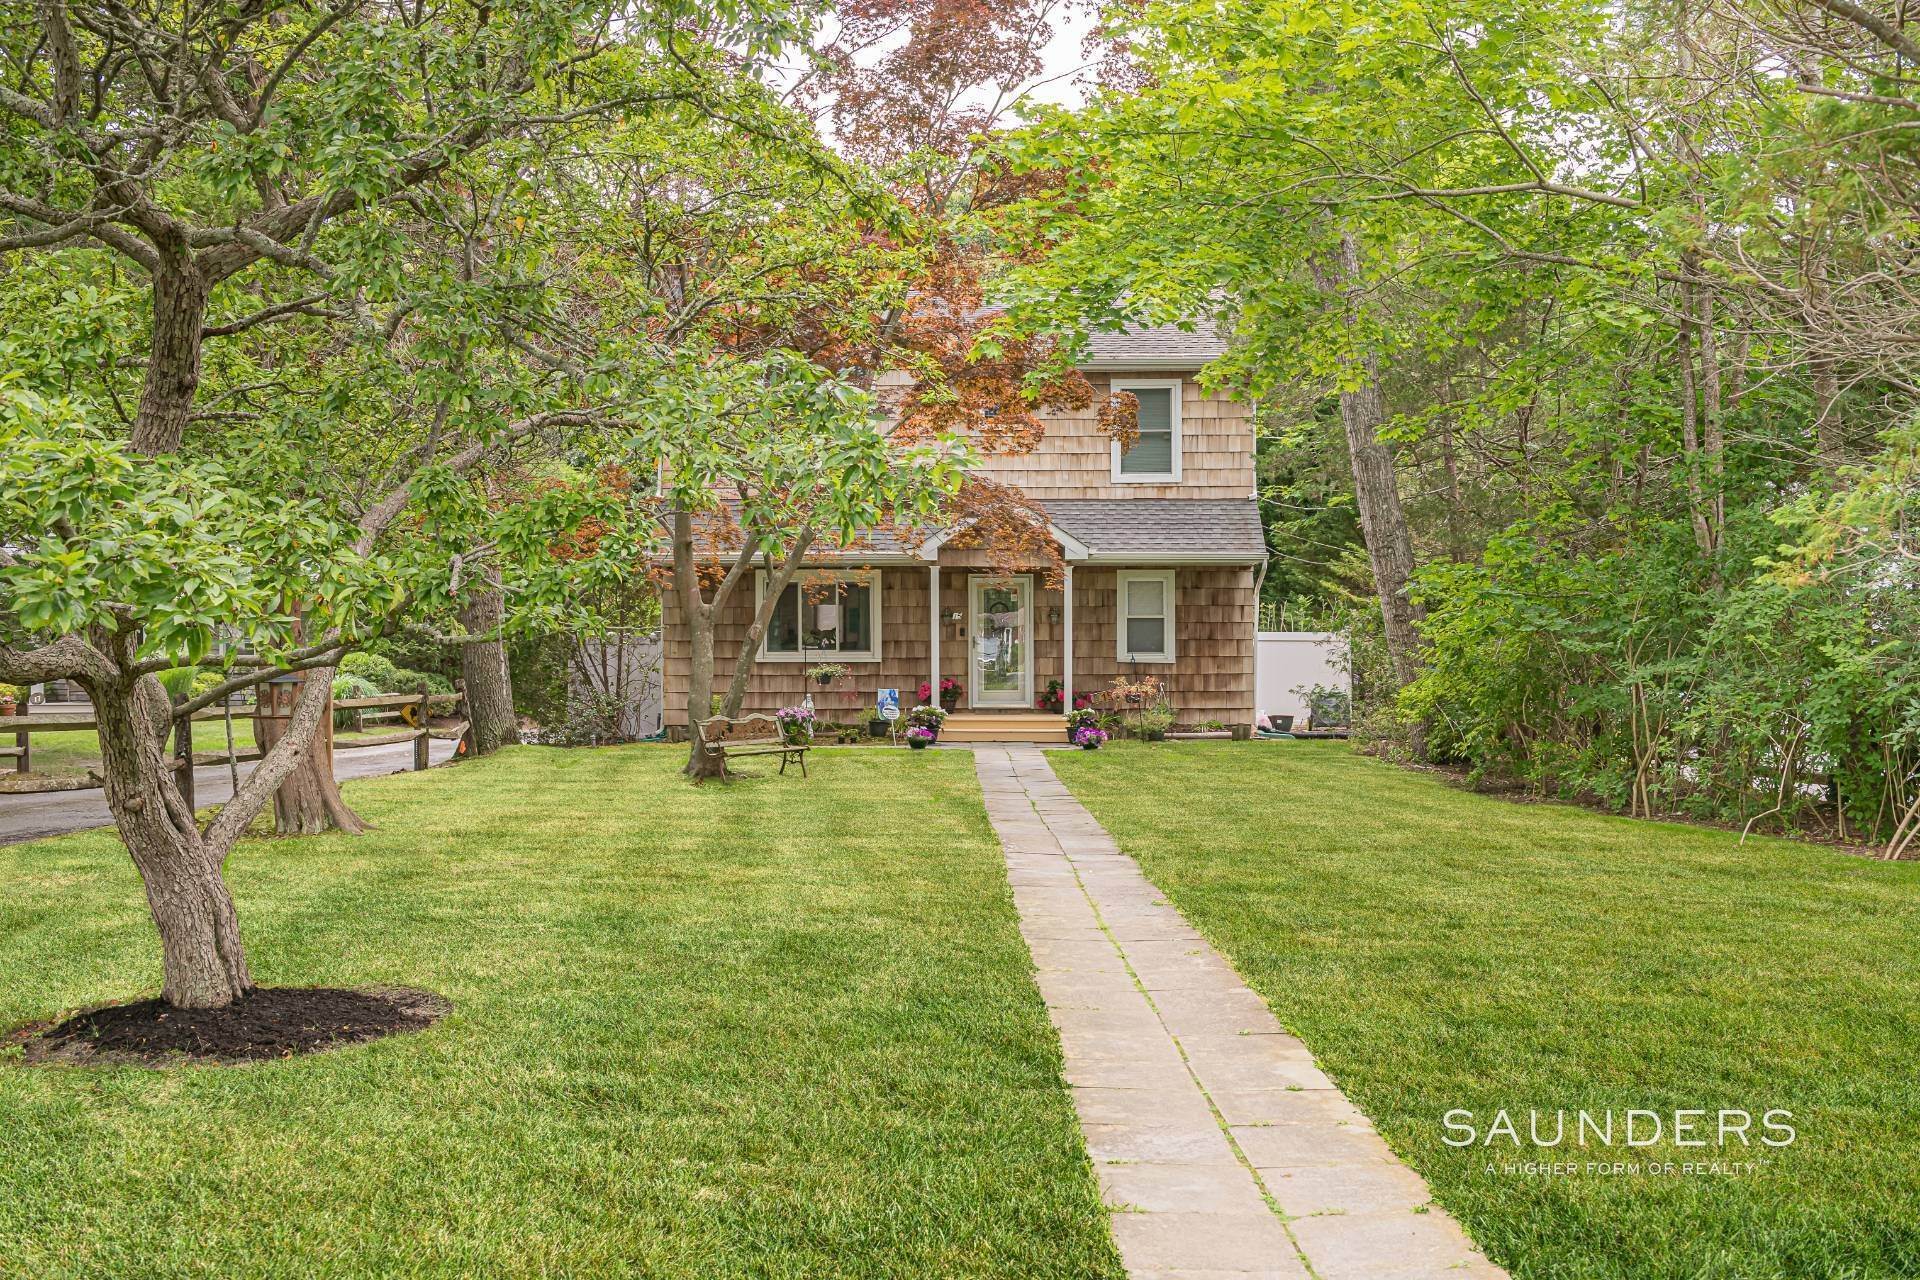 4. Single Family Homes for Sale at Desirable Baycrest Neighborhood With Deeded Water Access 15 Baycrest Avenue, Westhampton, NY 11977